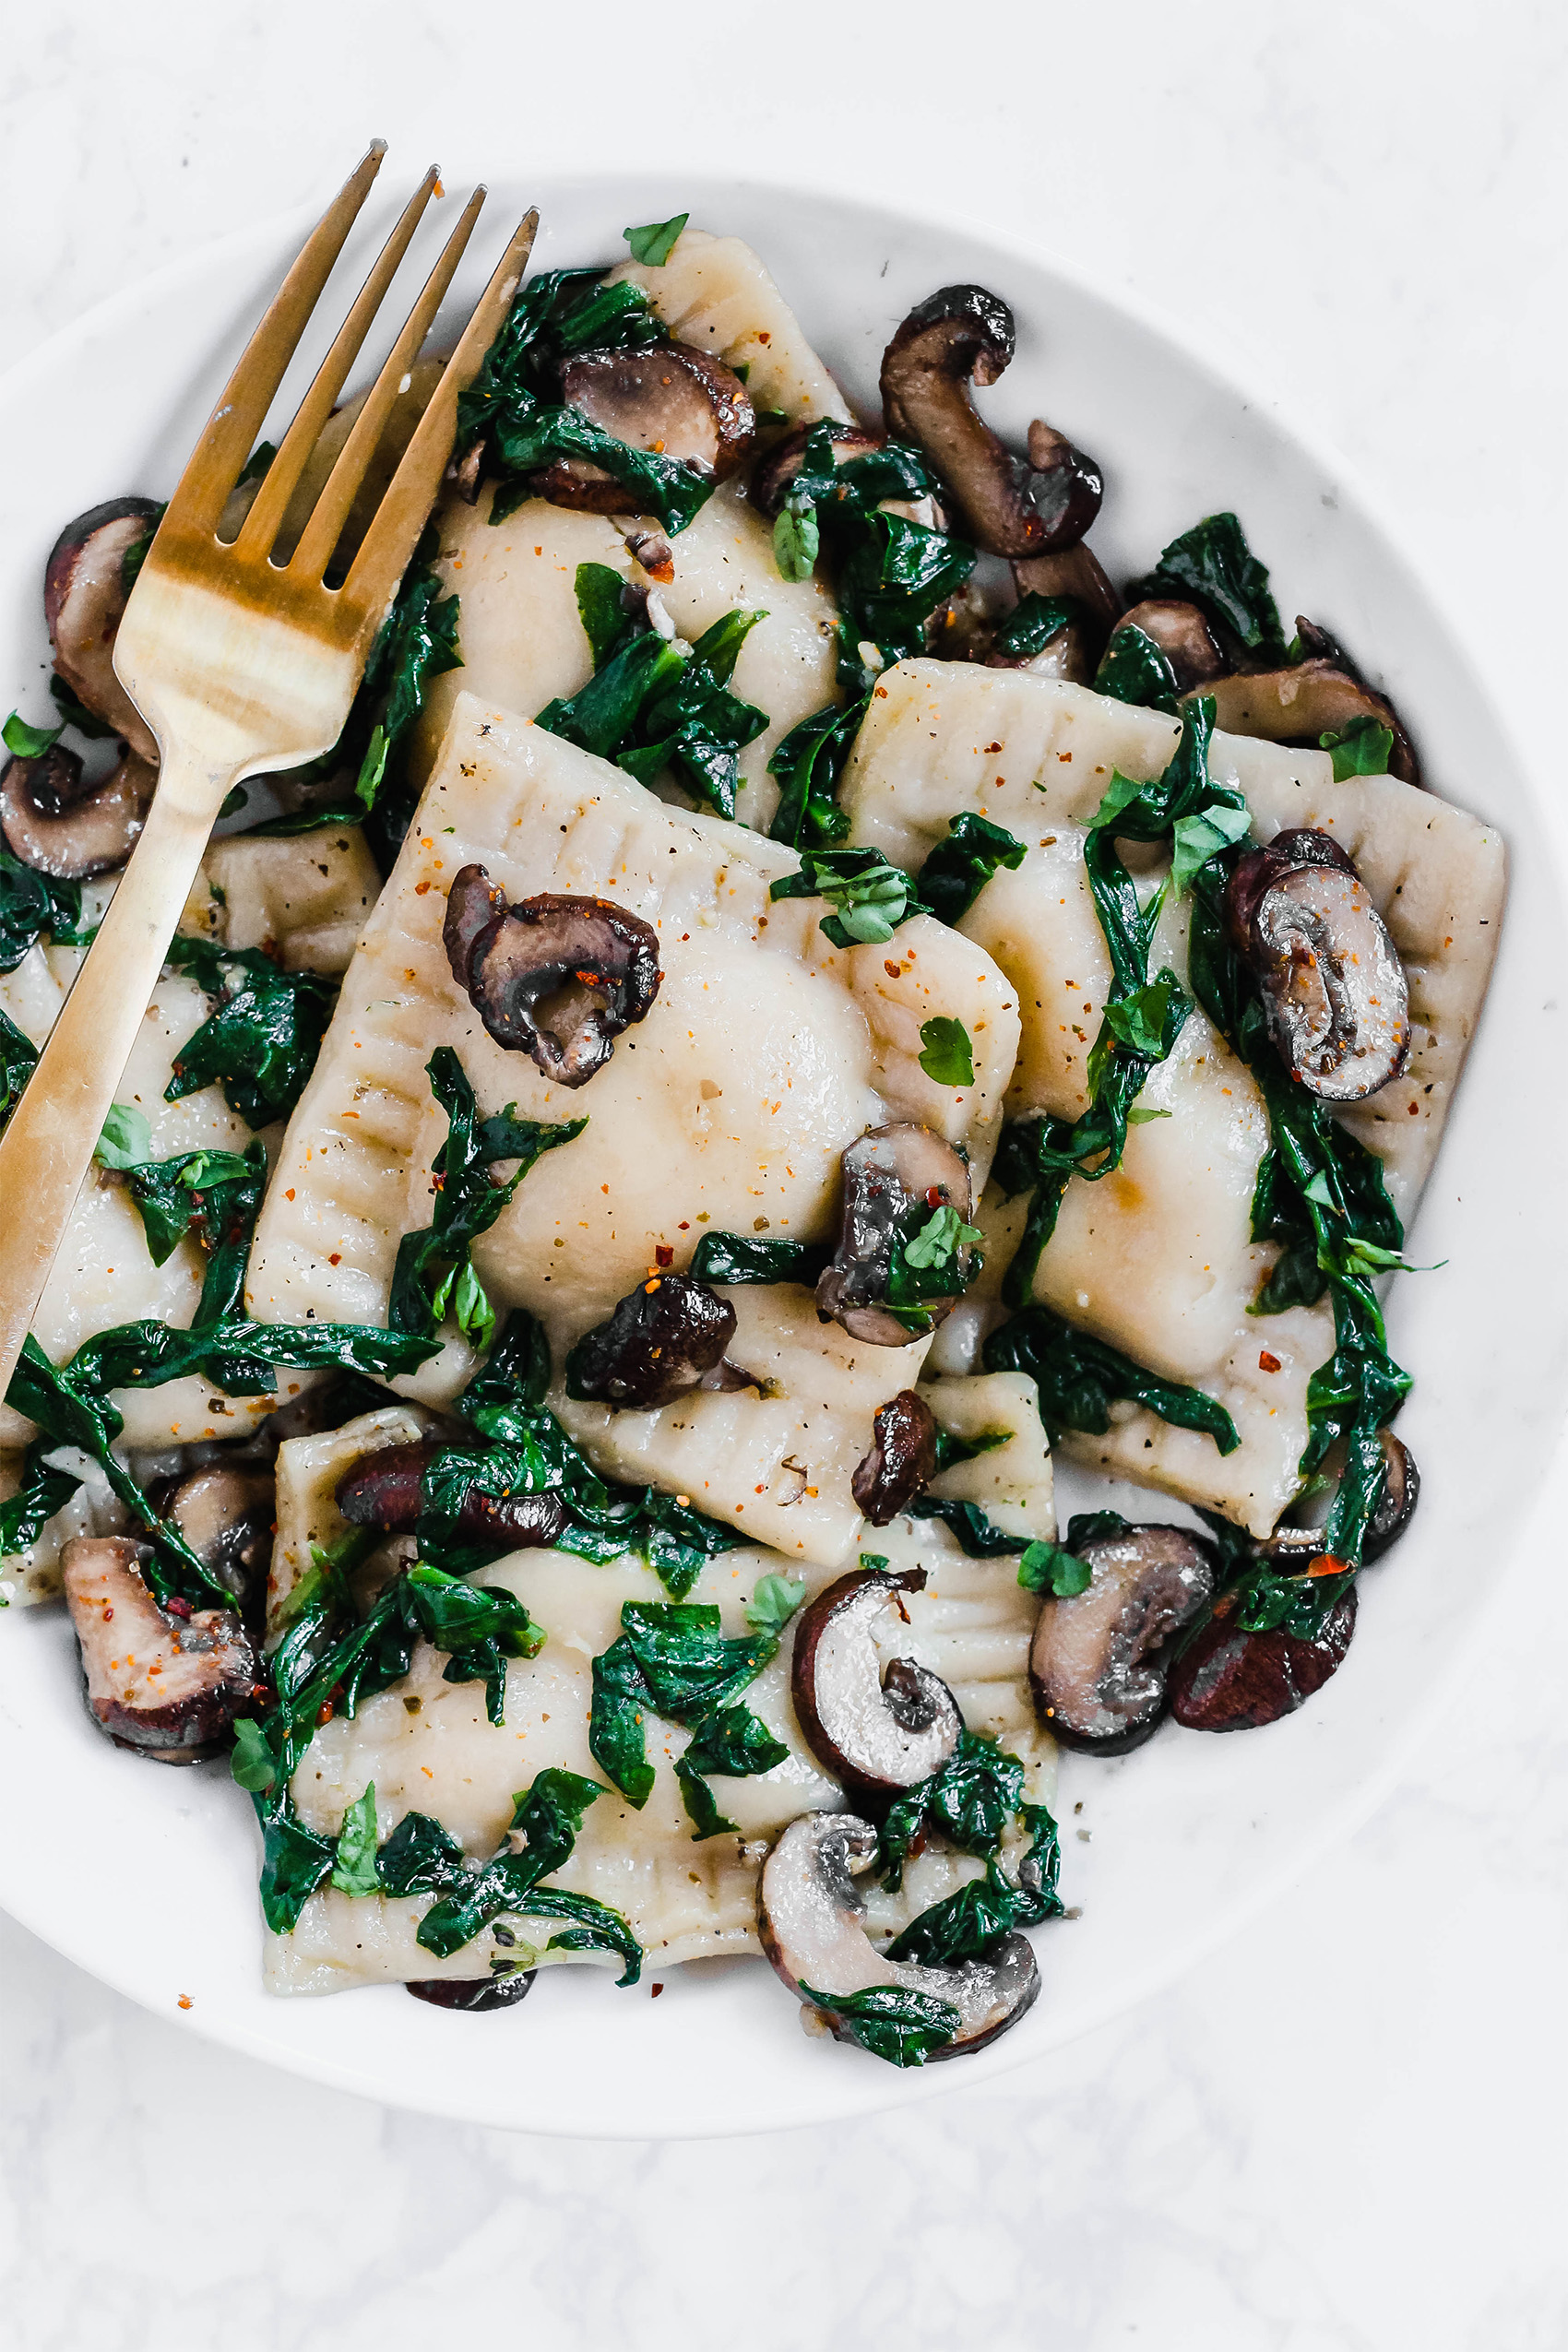 a plate of vegan ravioli served with sauteed mushrooms and spinach